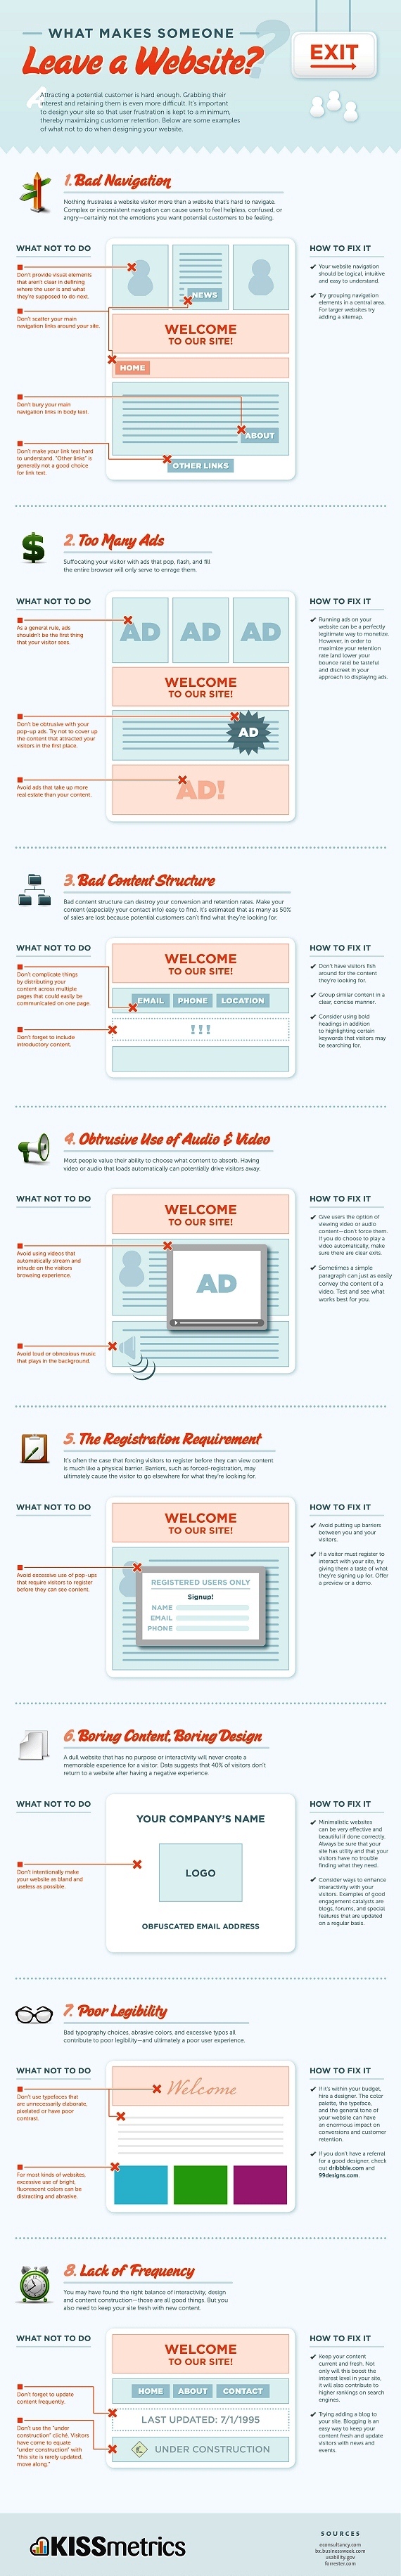 What makes someone leave a website infographic